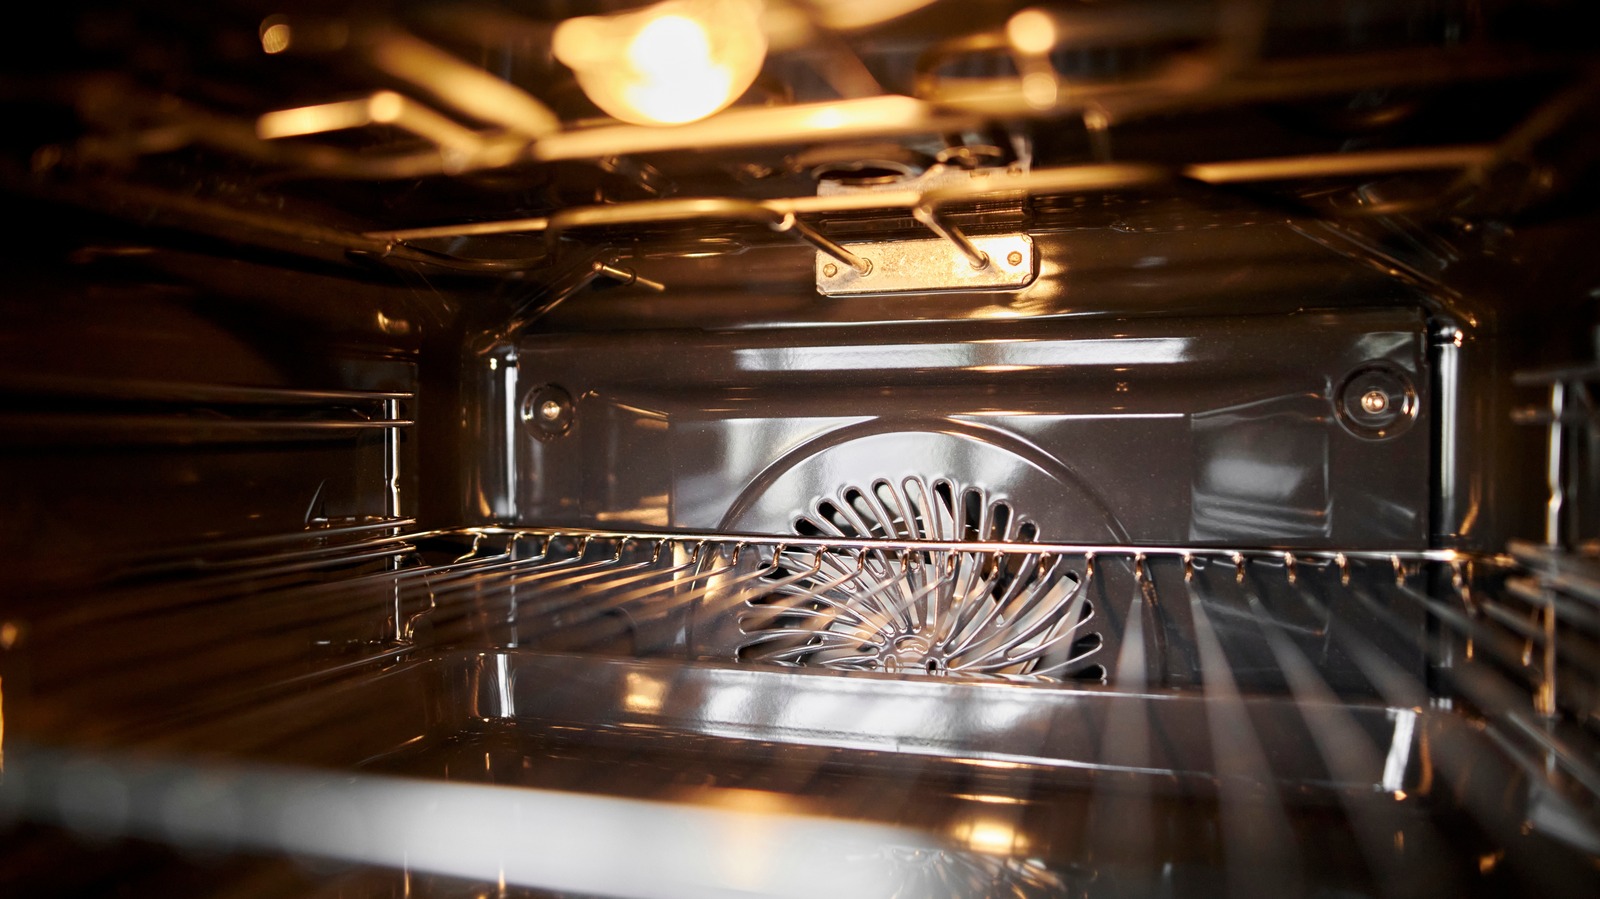 The Best and Worst Times to Use an Oven's Self-Cleaning Feature